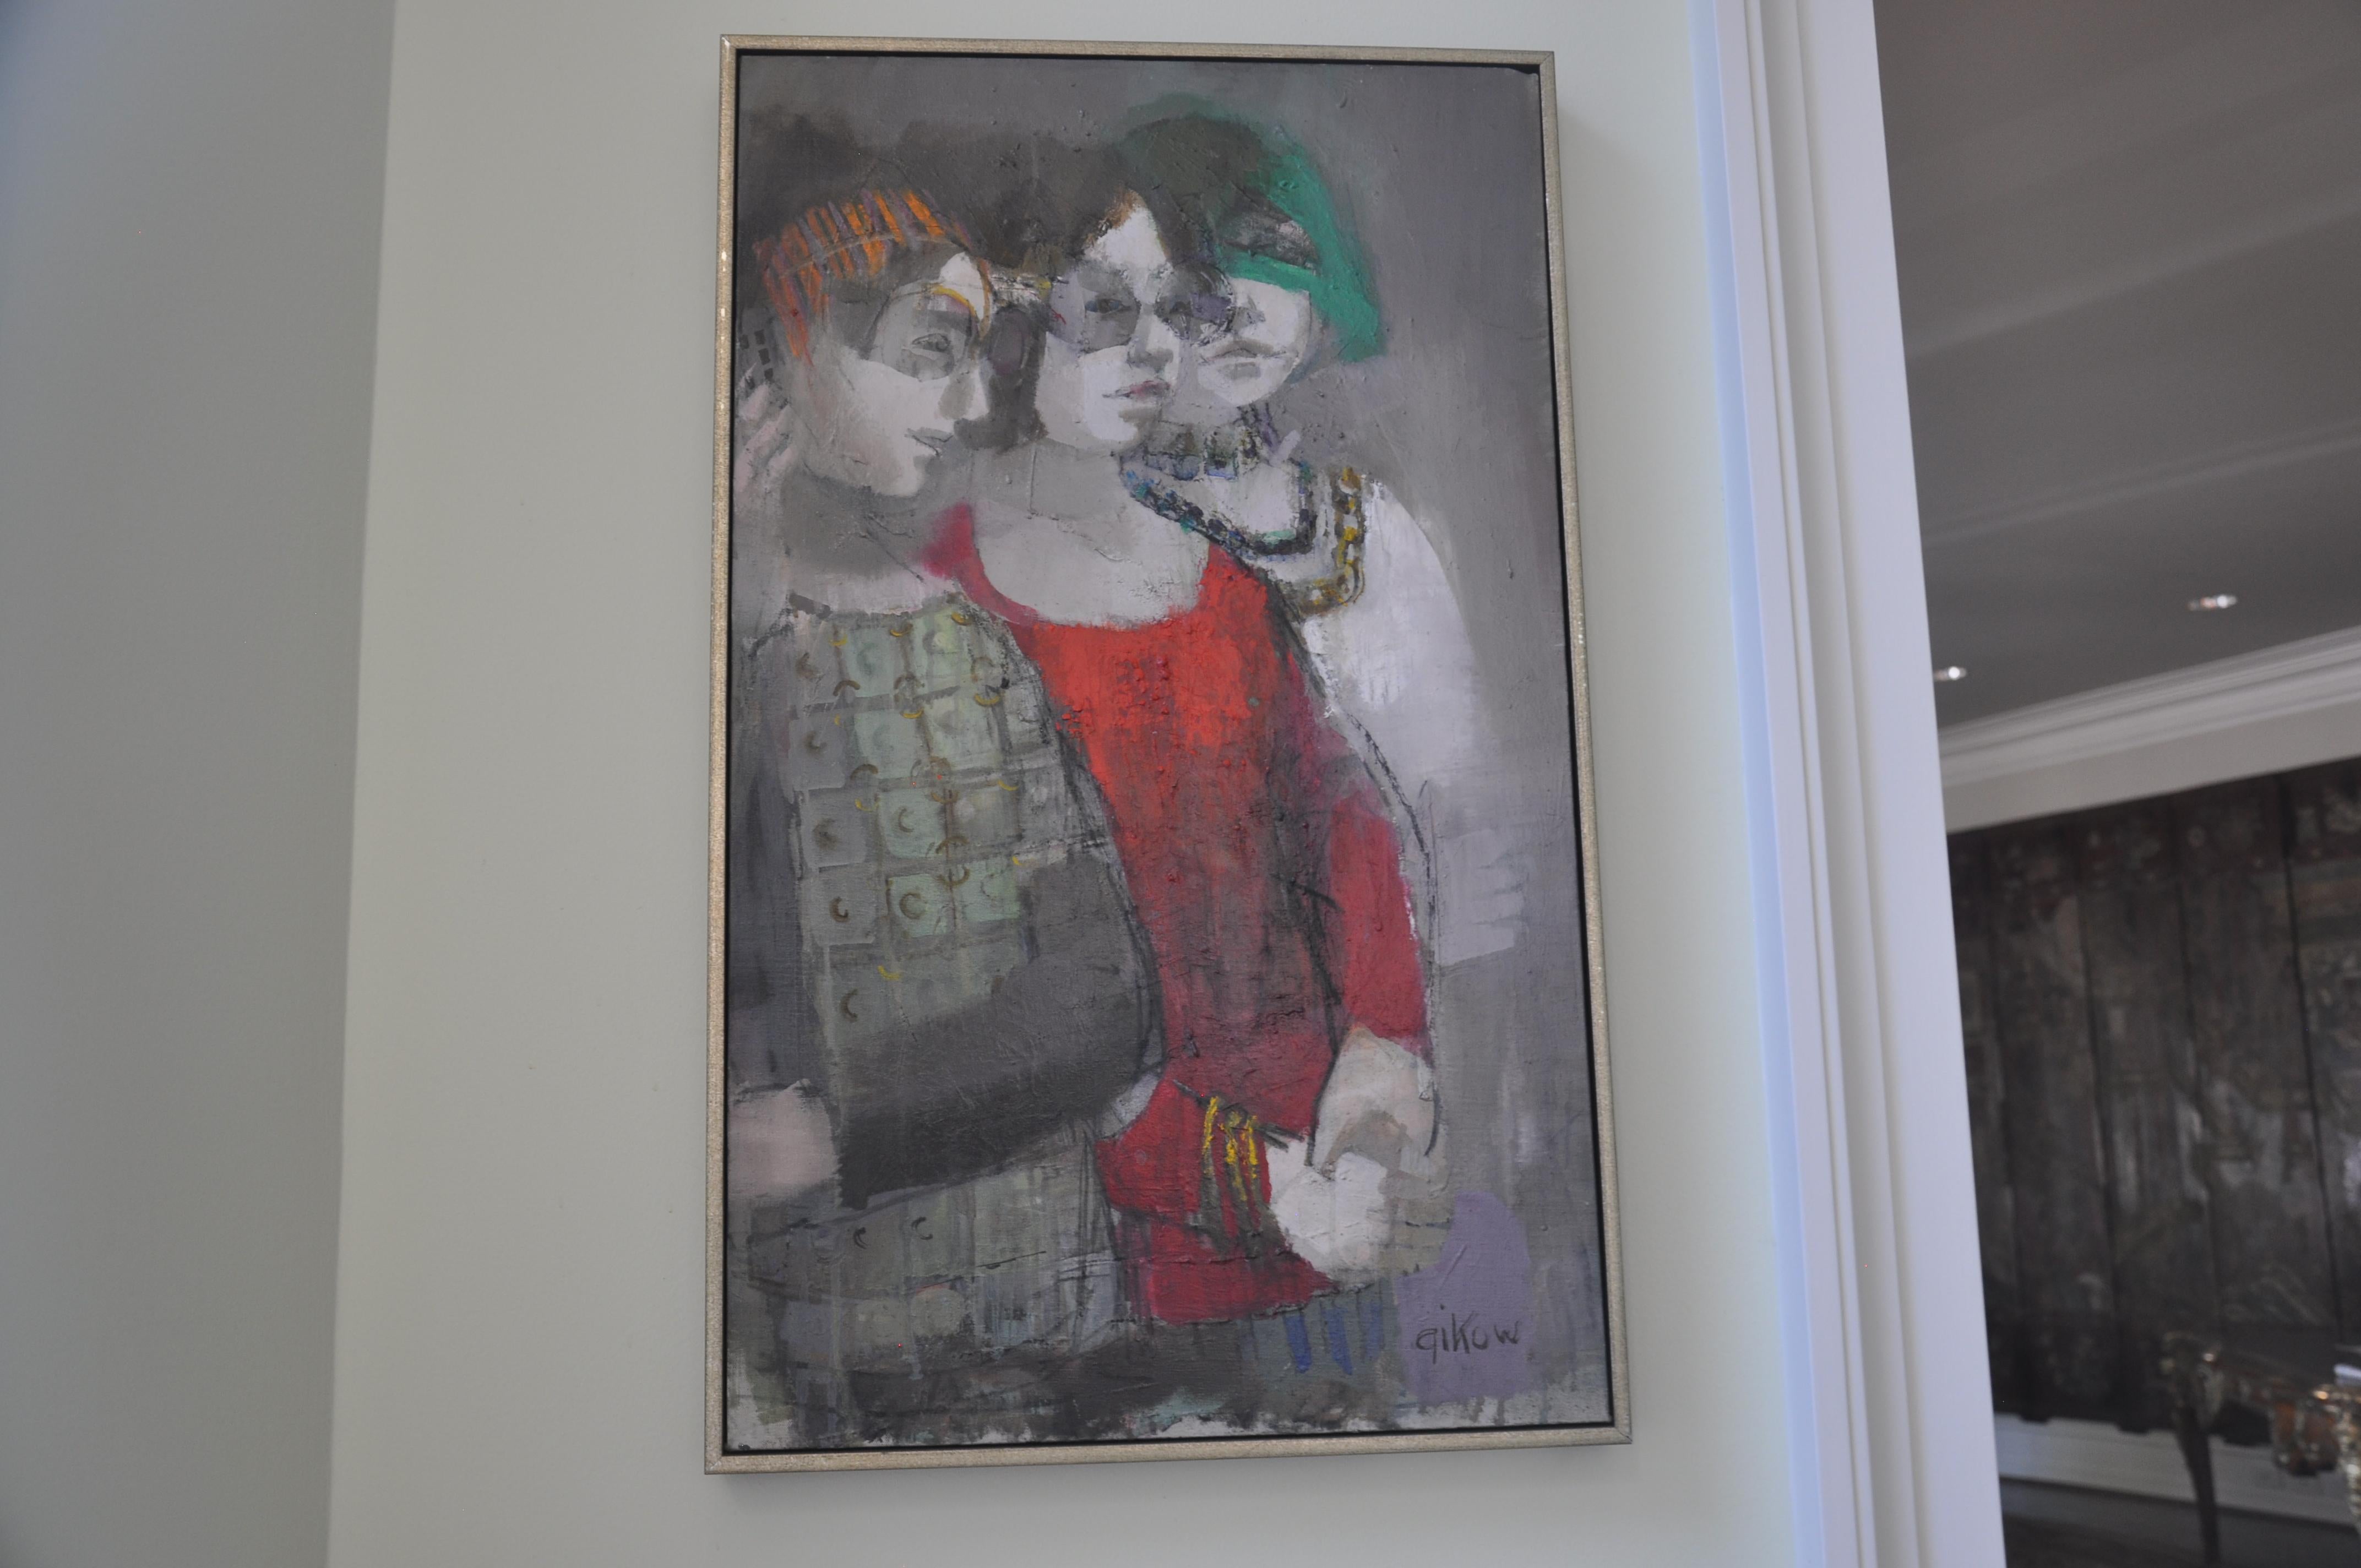 Three 60s Girls - Gray Portrait Painting by Ruth Gikow